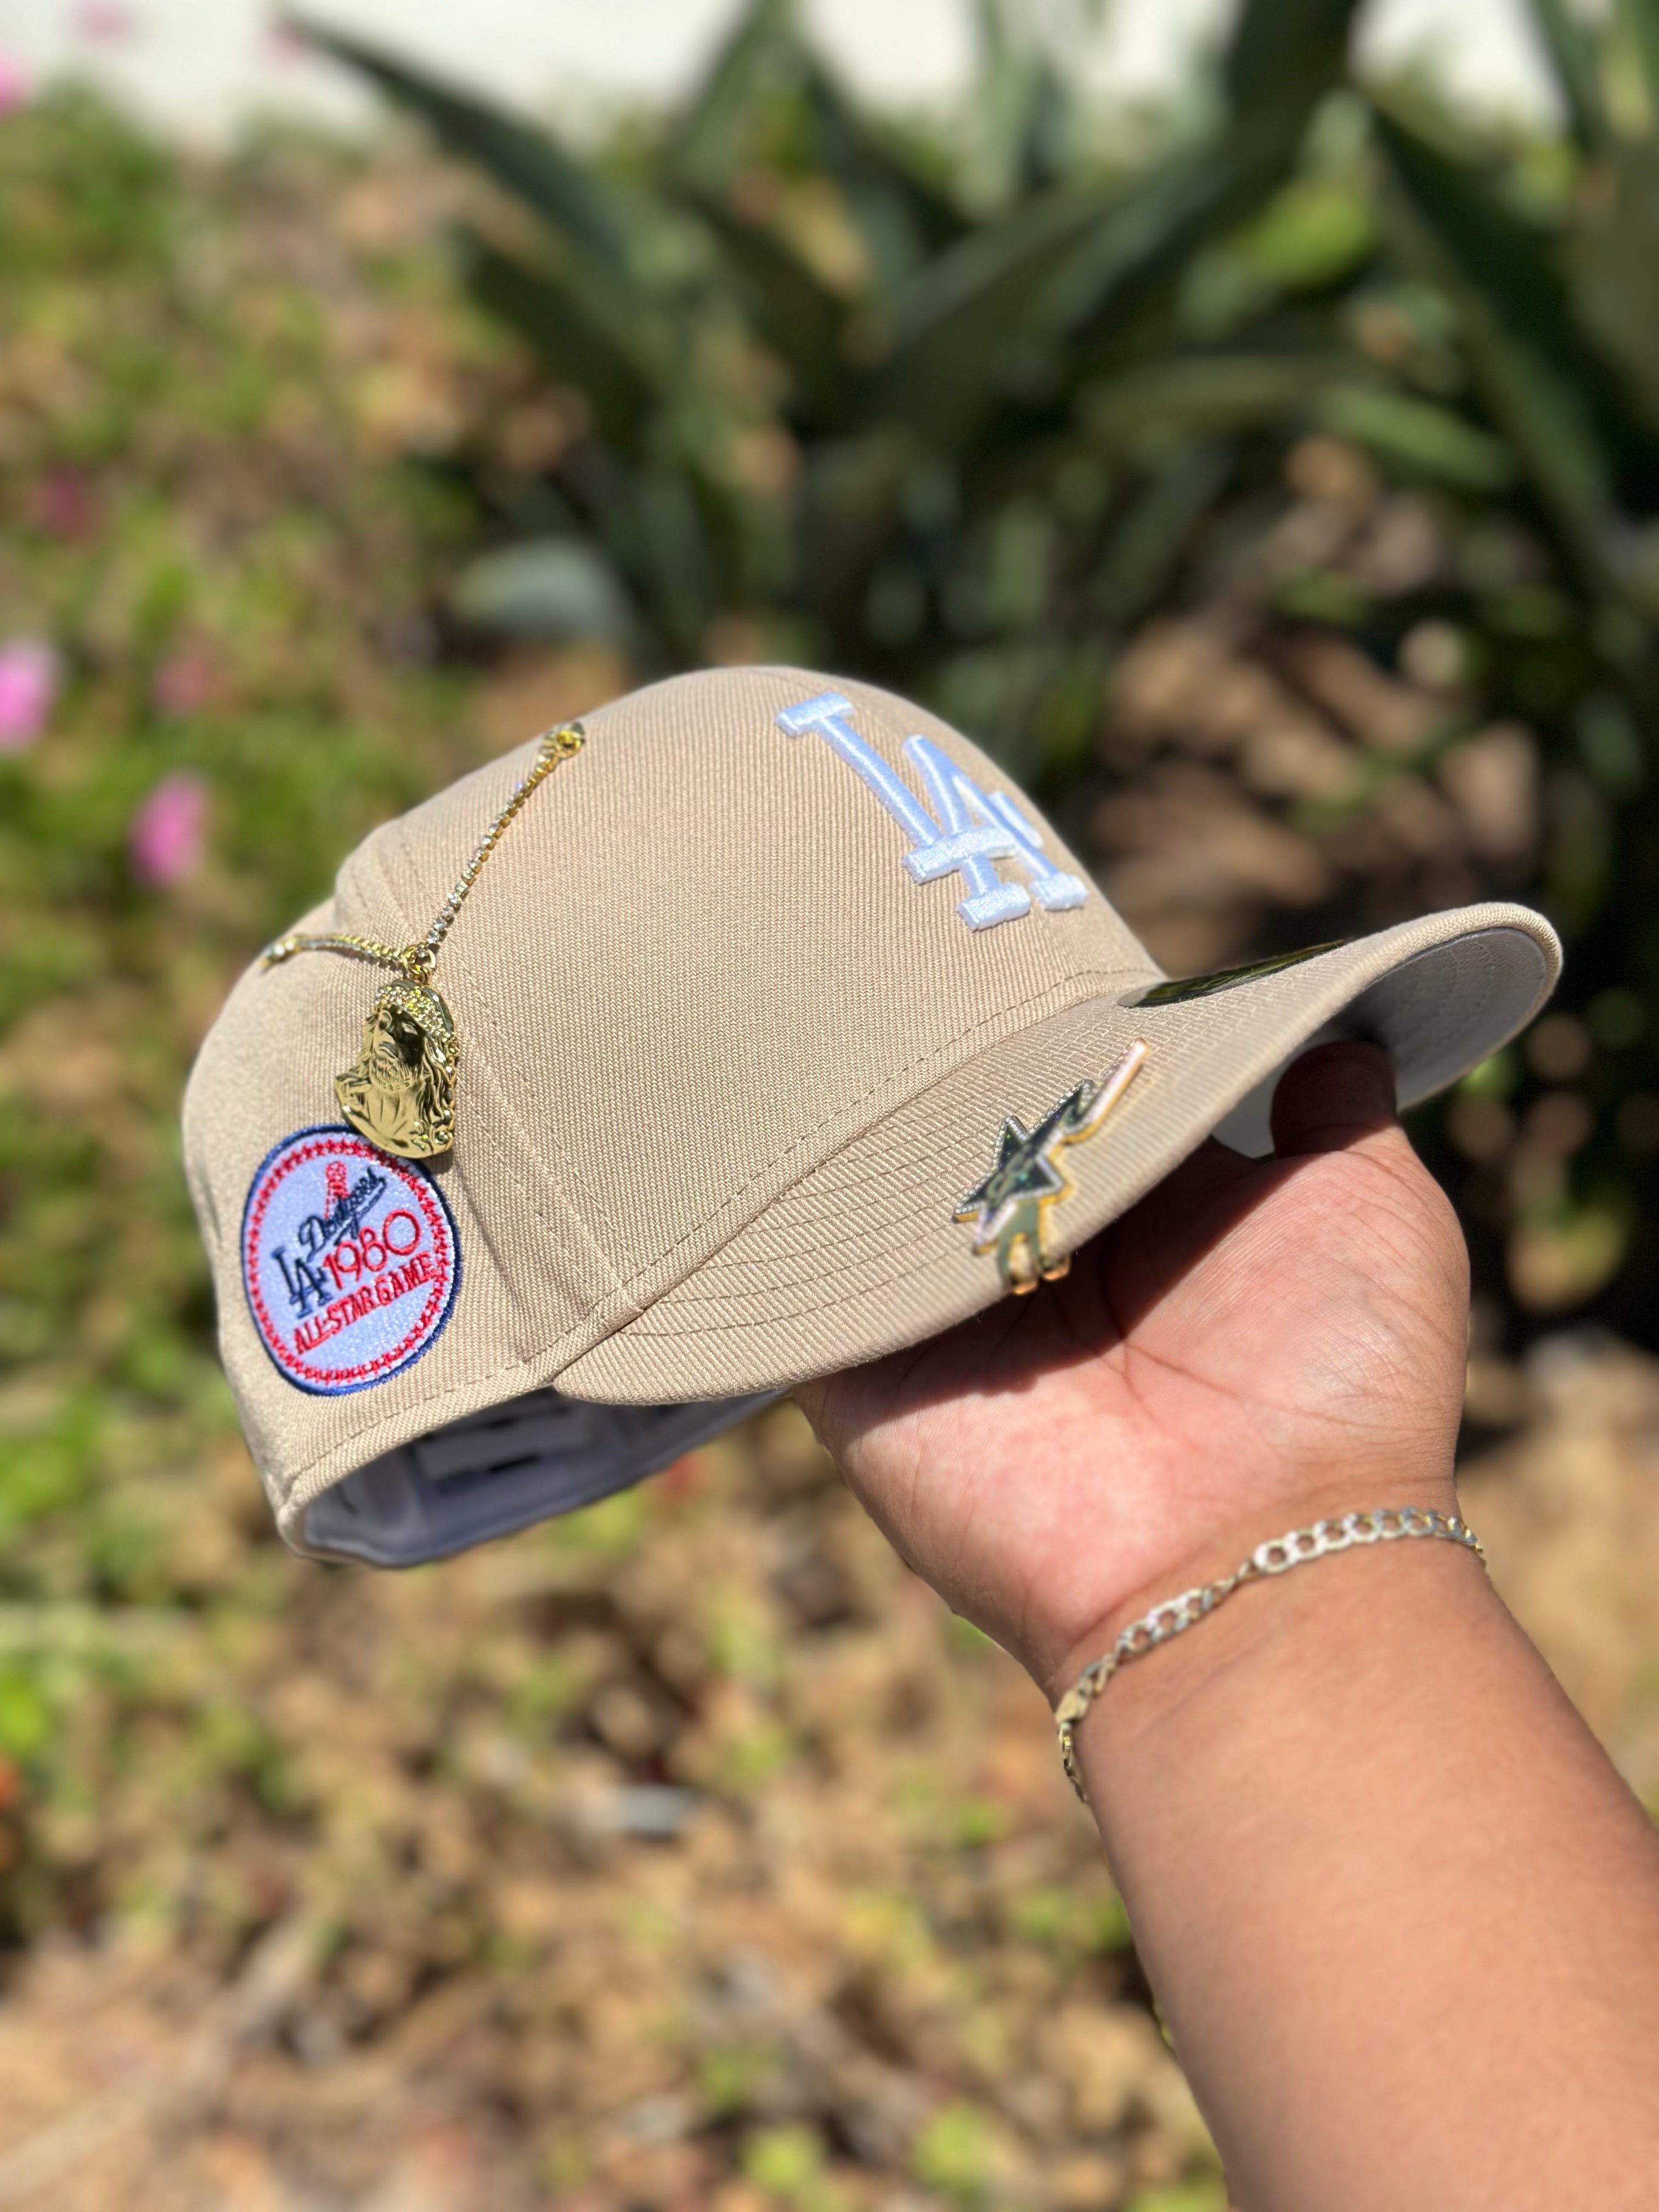 NEW ERA 59FIFTY LIGHT KHAKI LOS ANGELES DODGERS W/ 1980 ALL STAR GAME SIDE PATCH